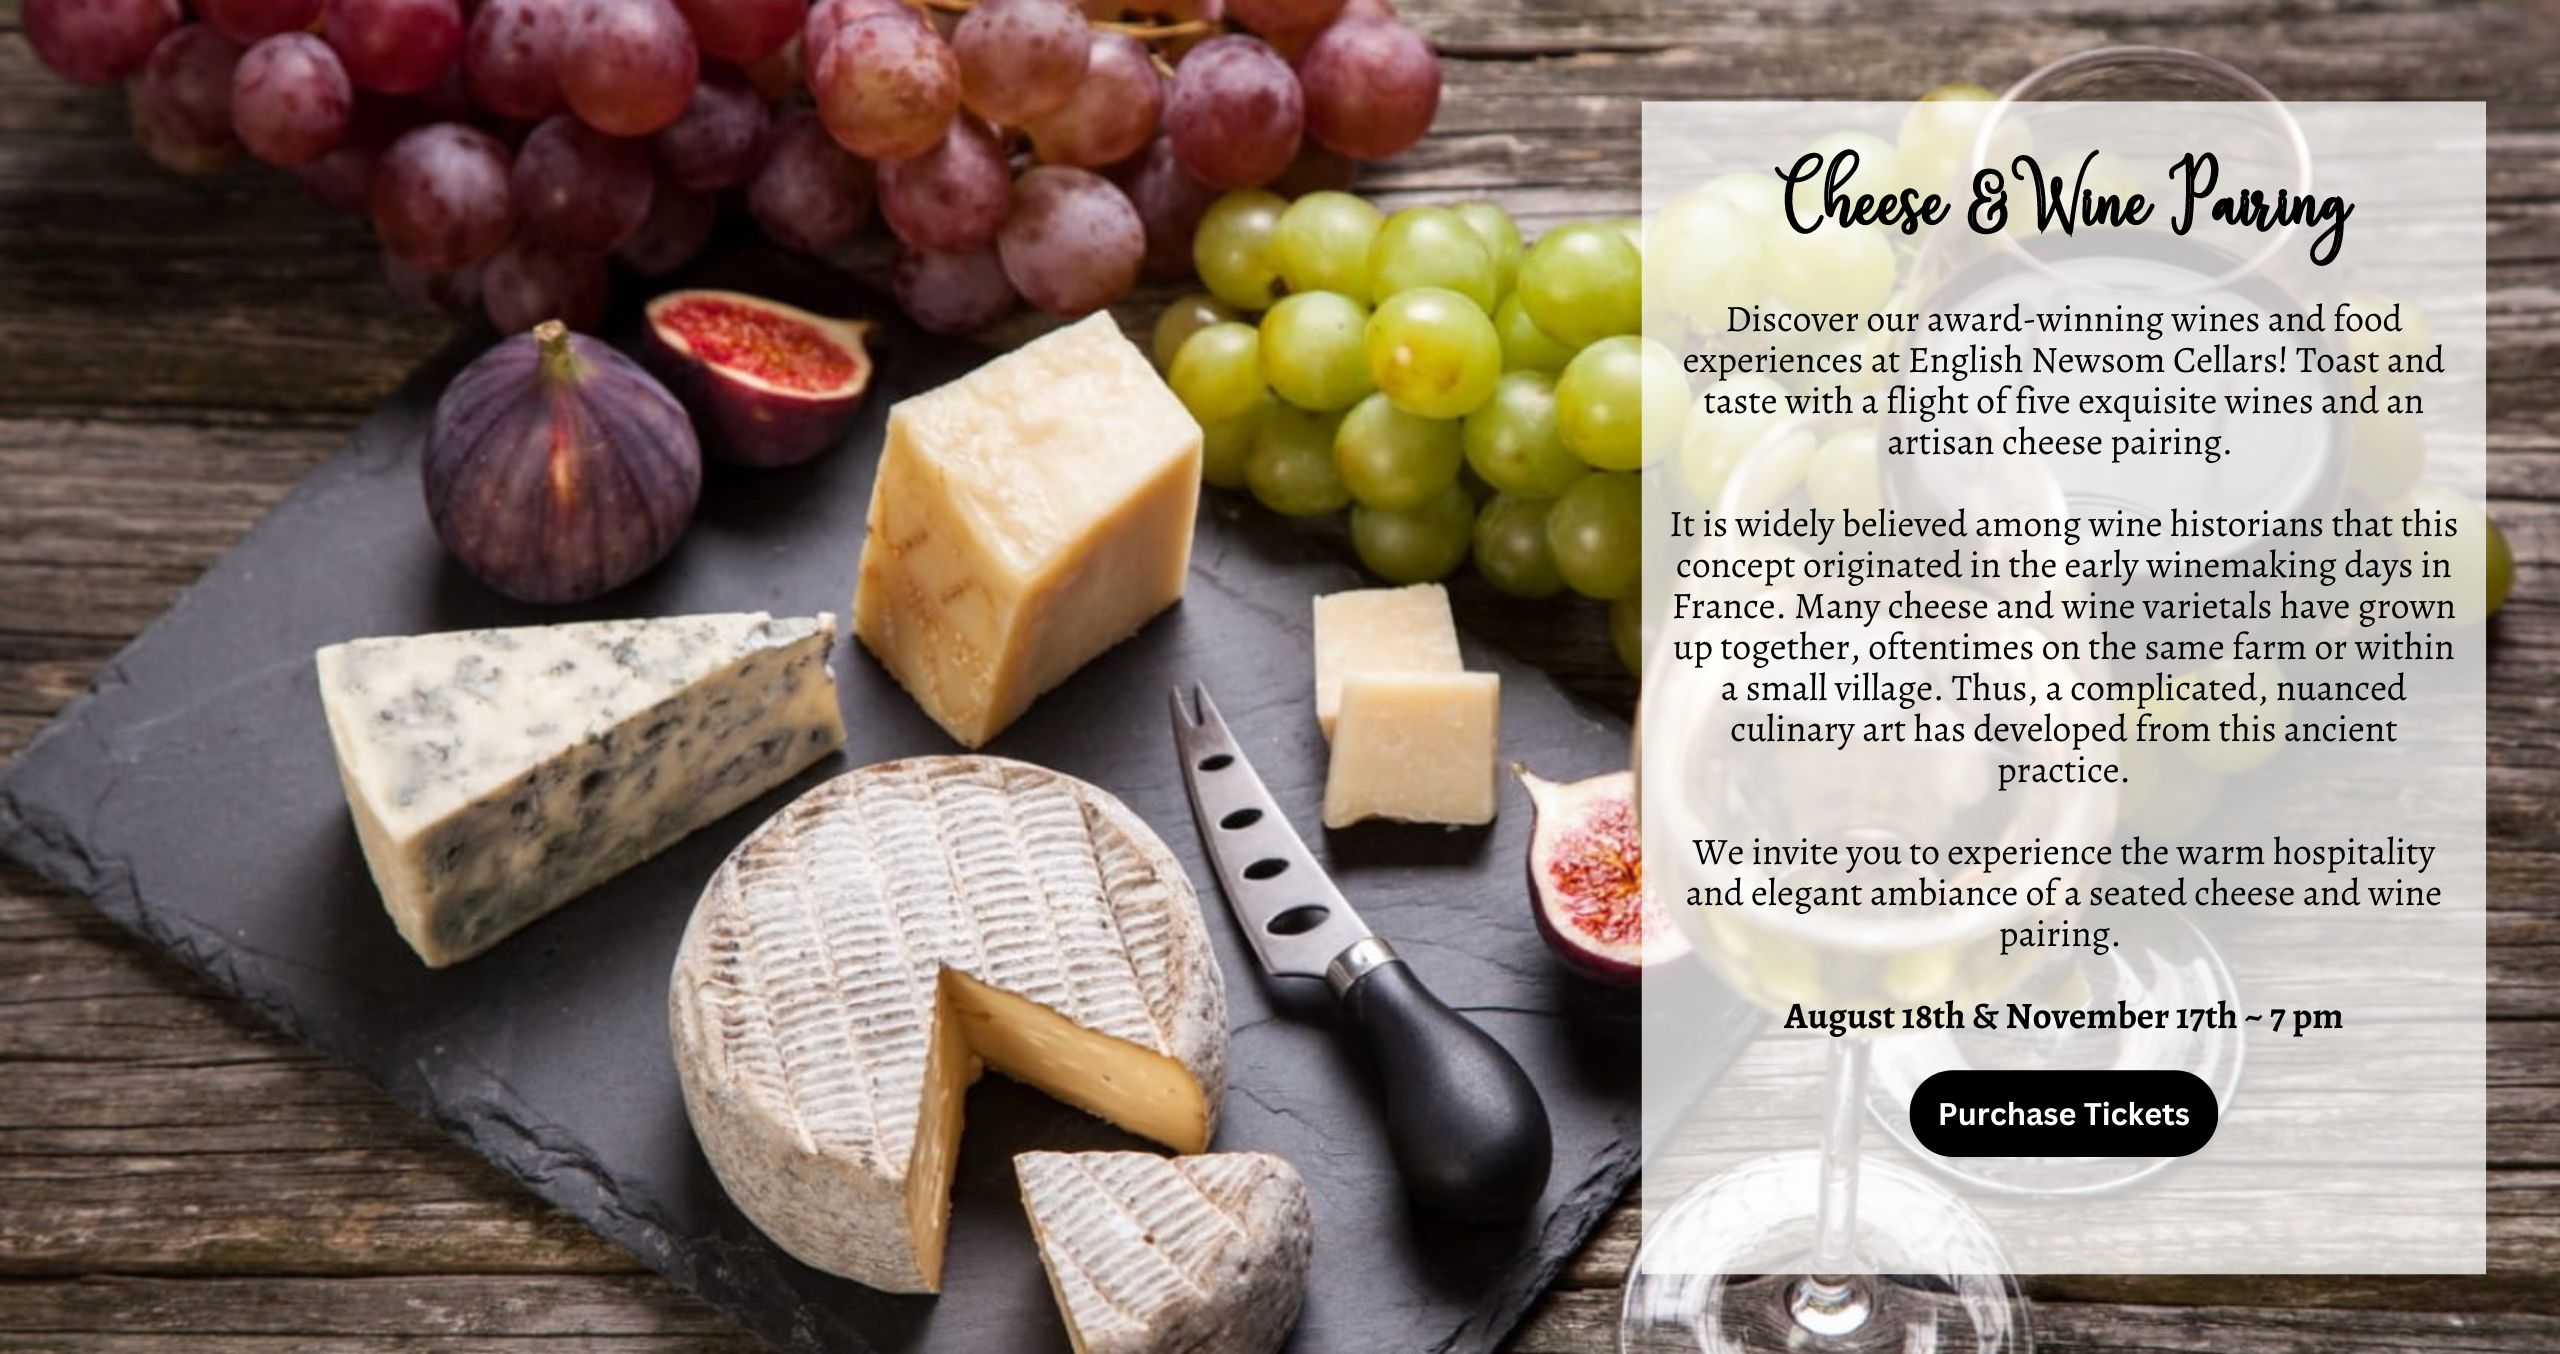 Cheese & Wine Pairing event information